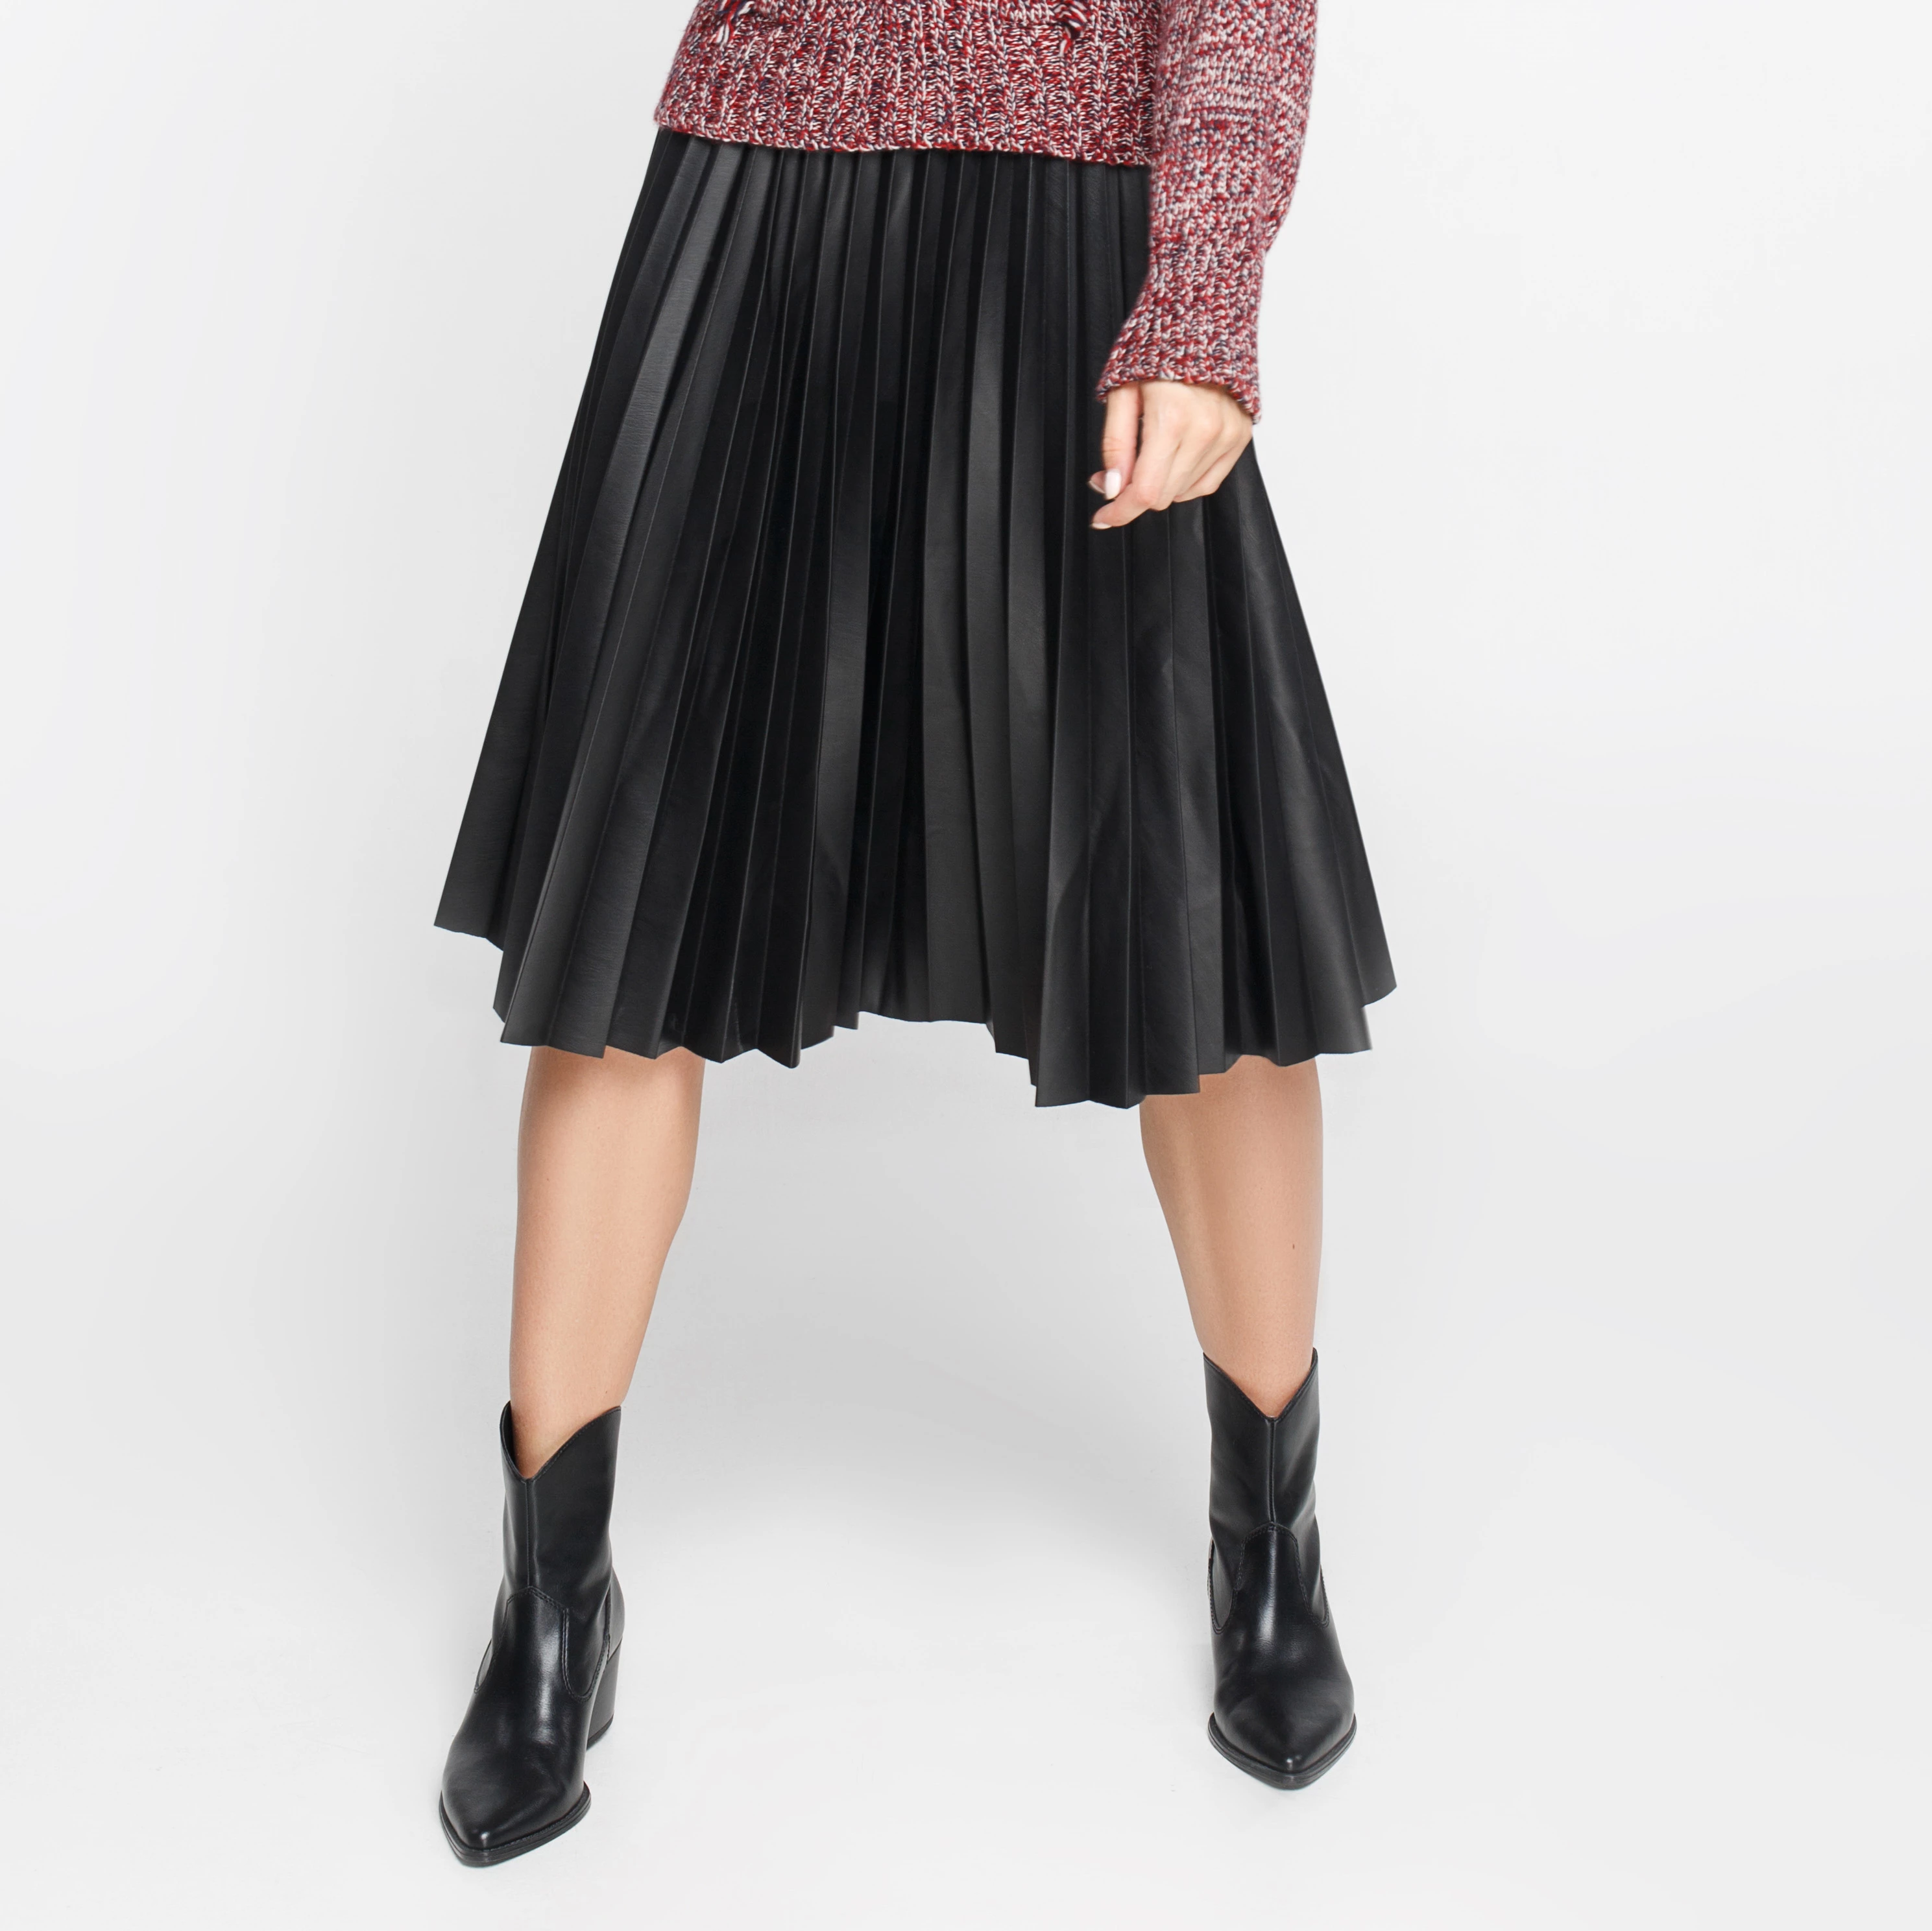 Black pleated leather skirt below the knee, photo 1